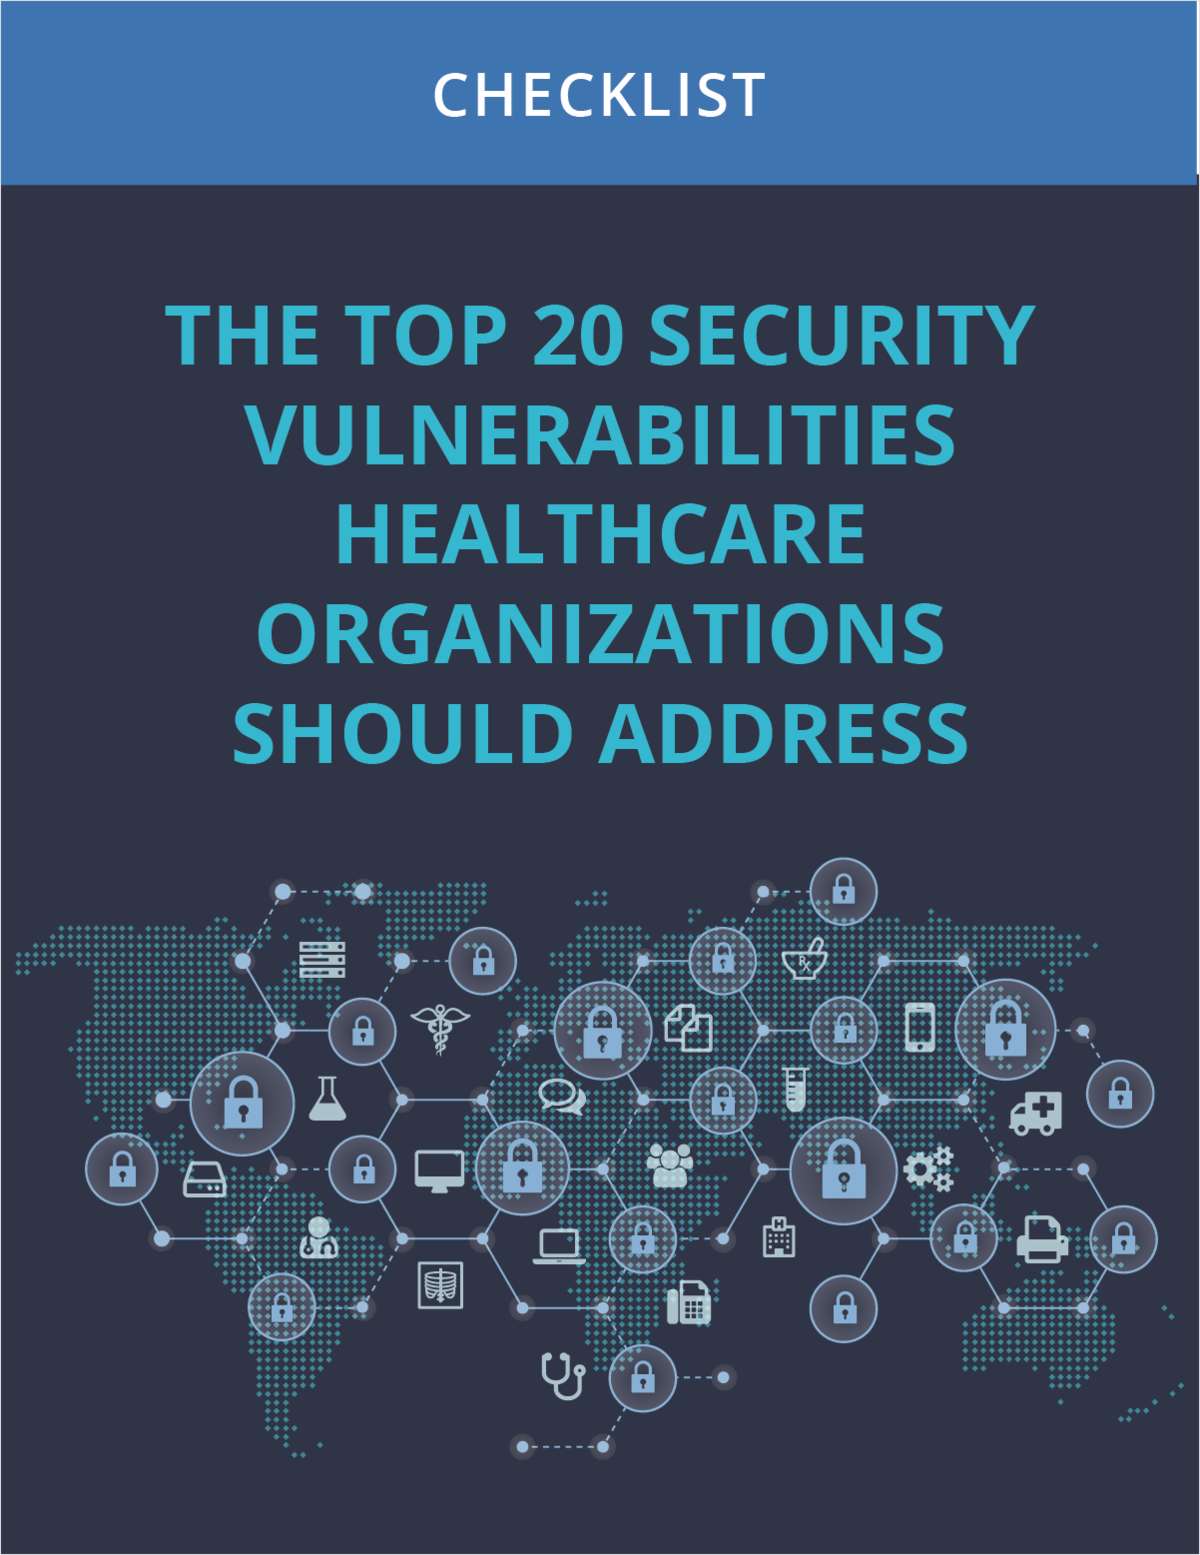 The Top 20 Security Vulnerabilities Healthcare Organizations Should Address